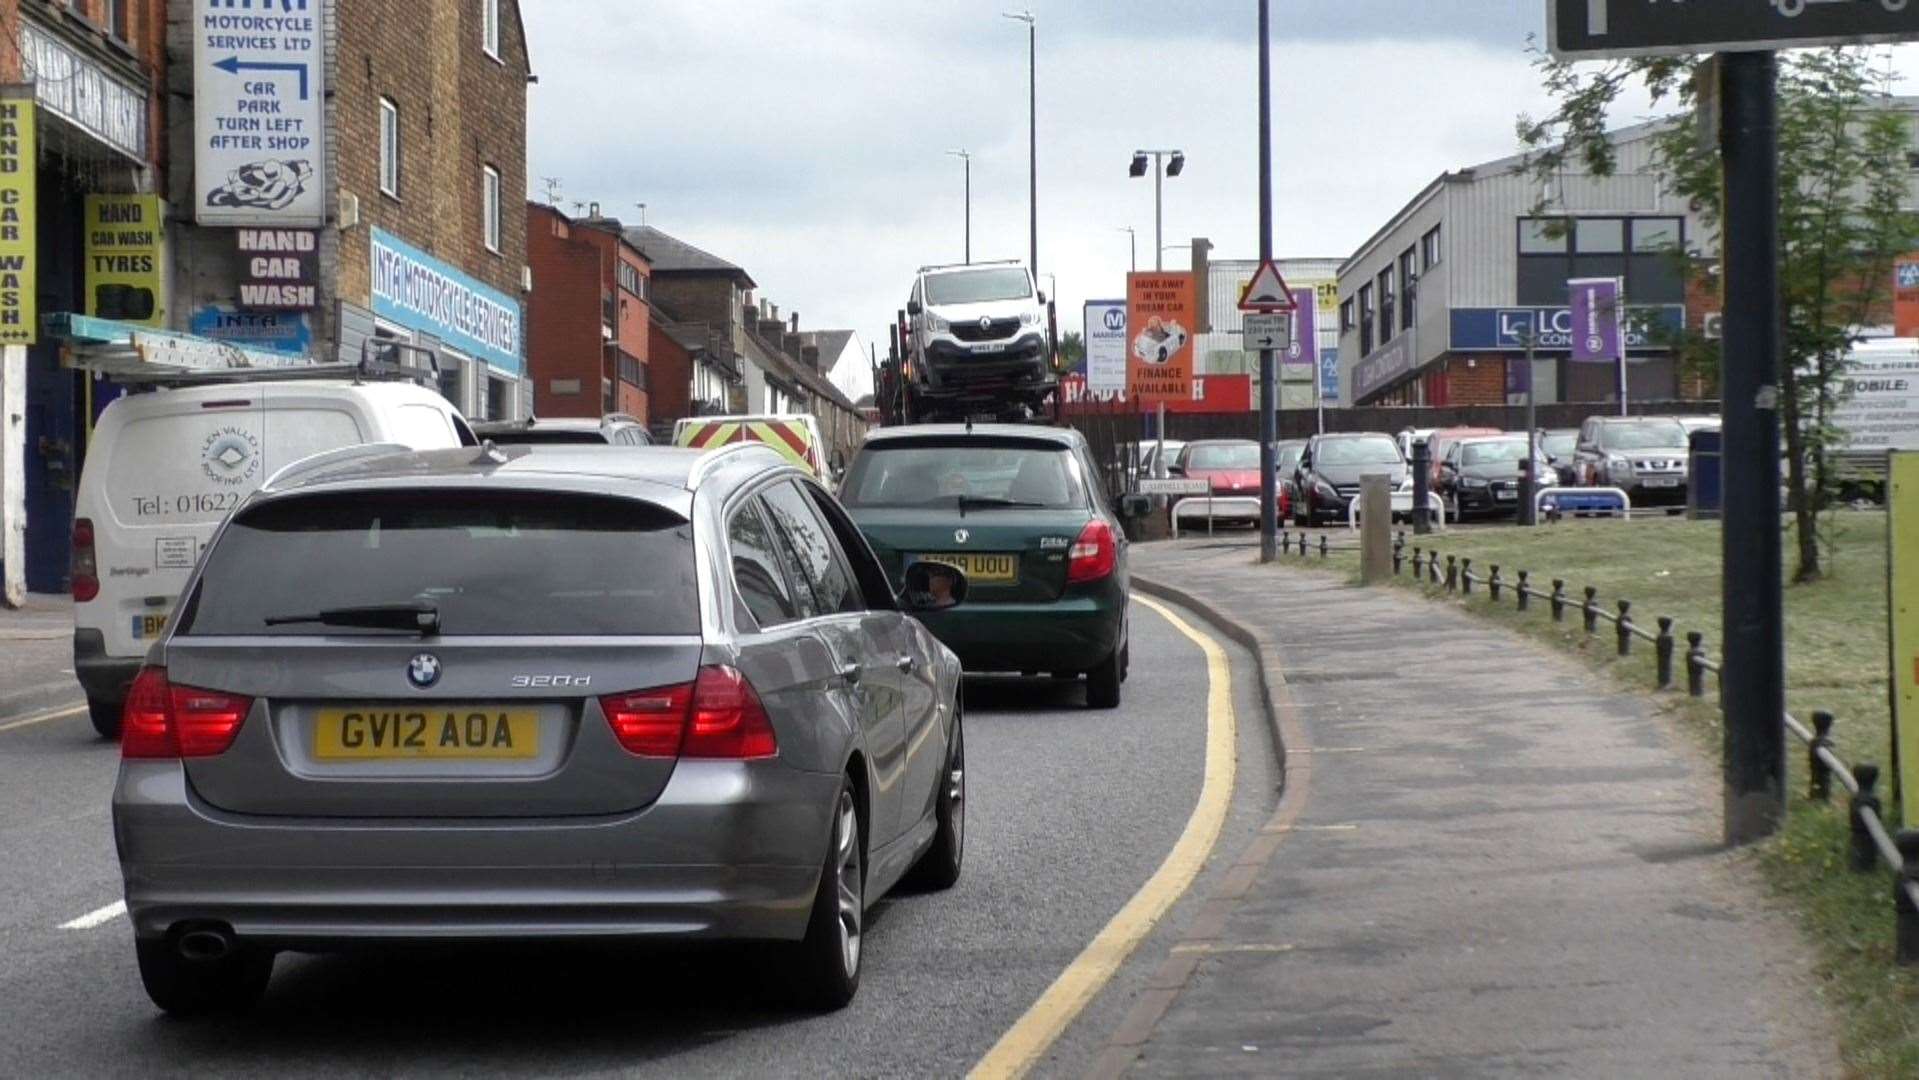 Maidstone's Upper Stone Street has the fifth highest level of pollution in the country